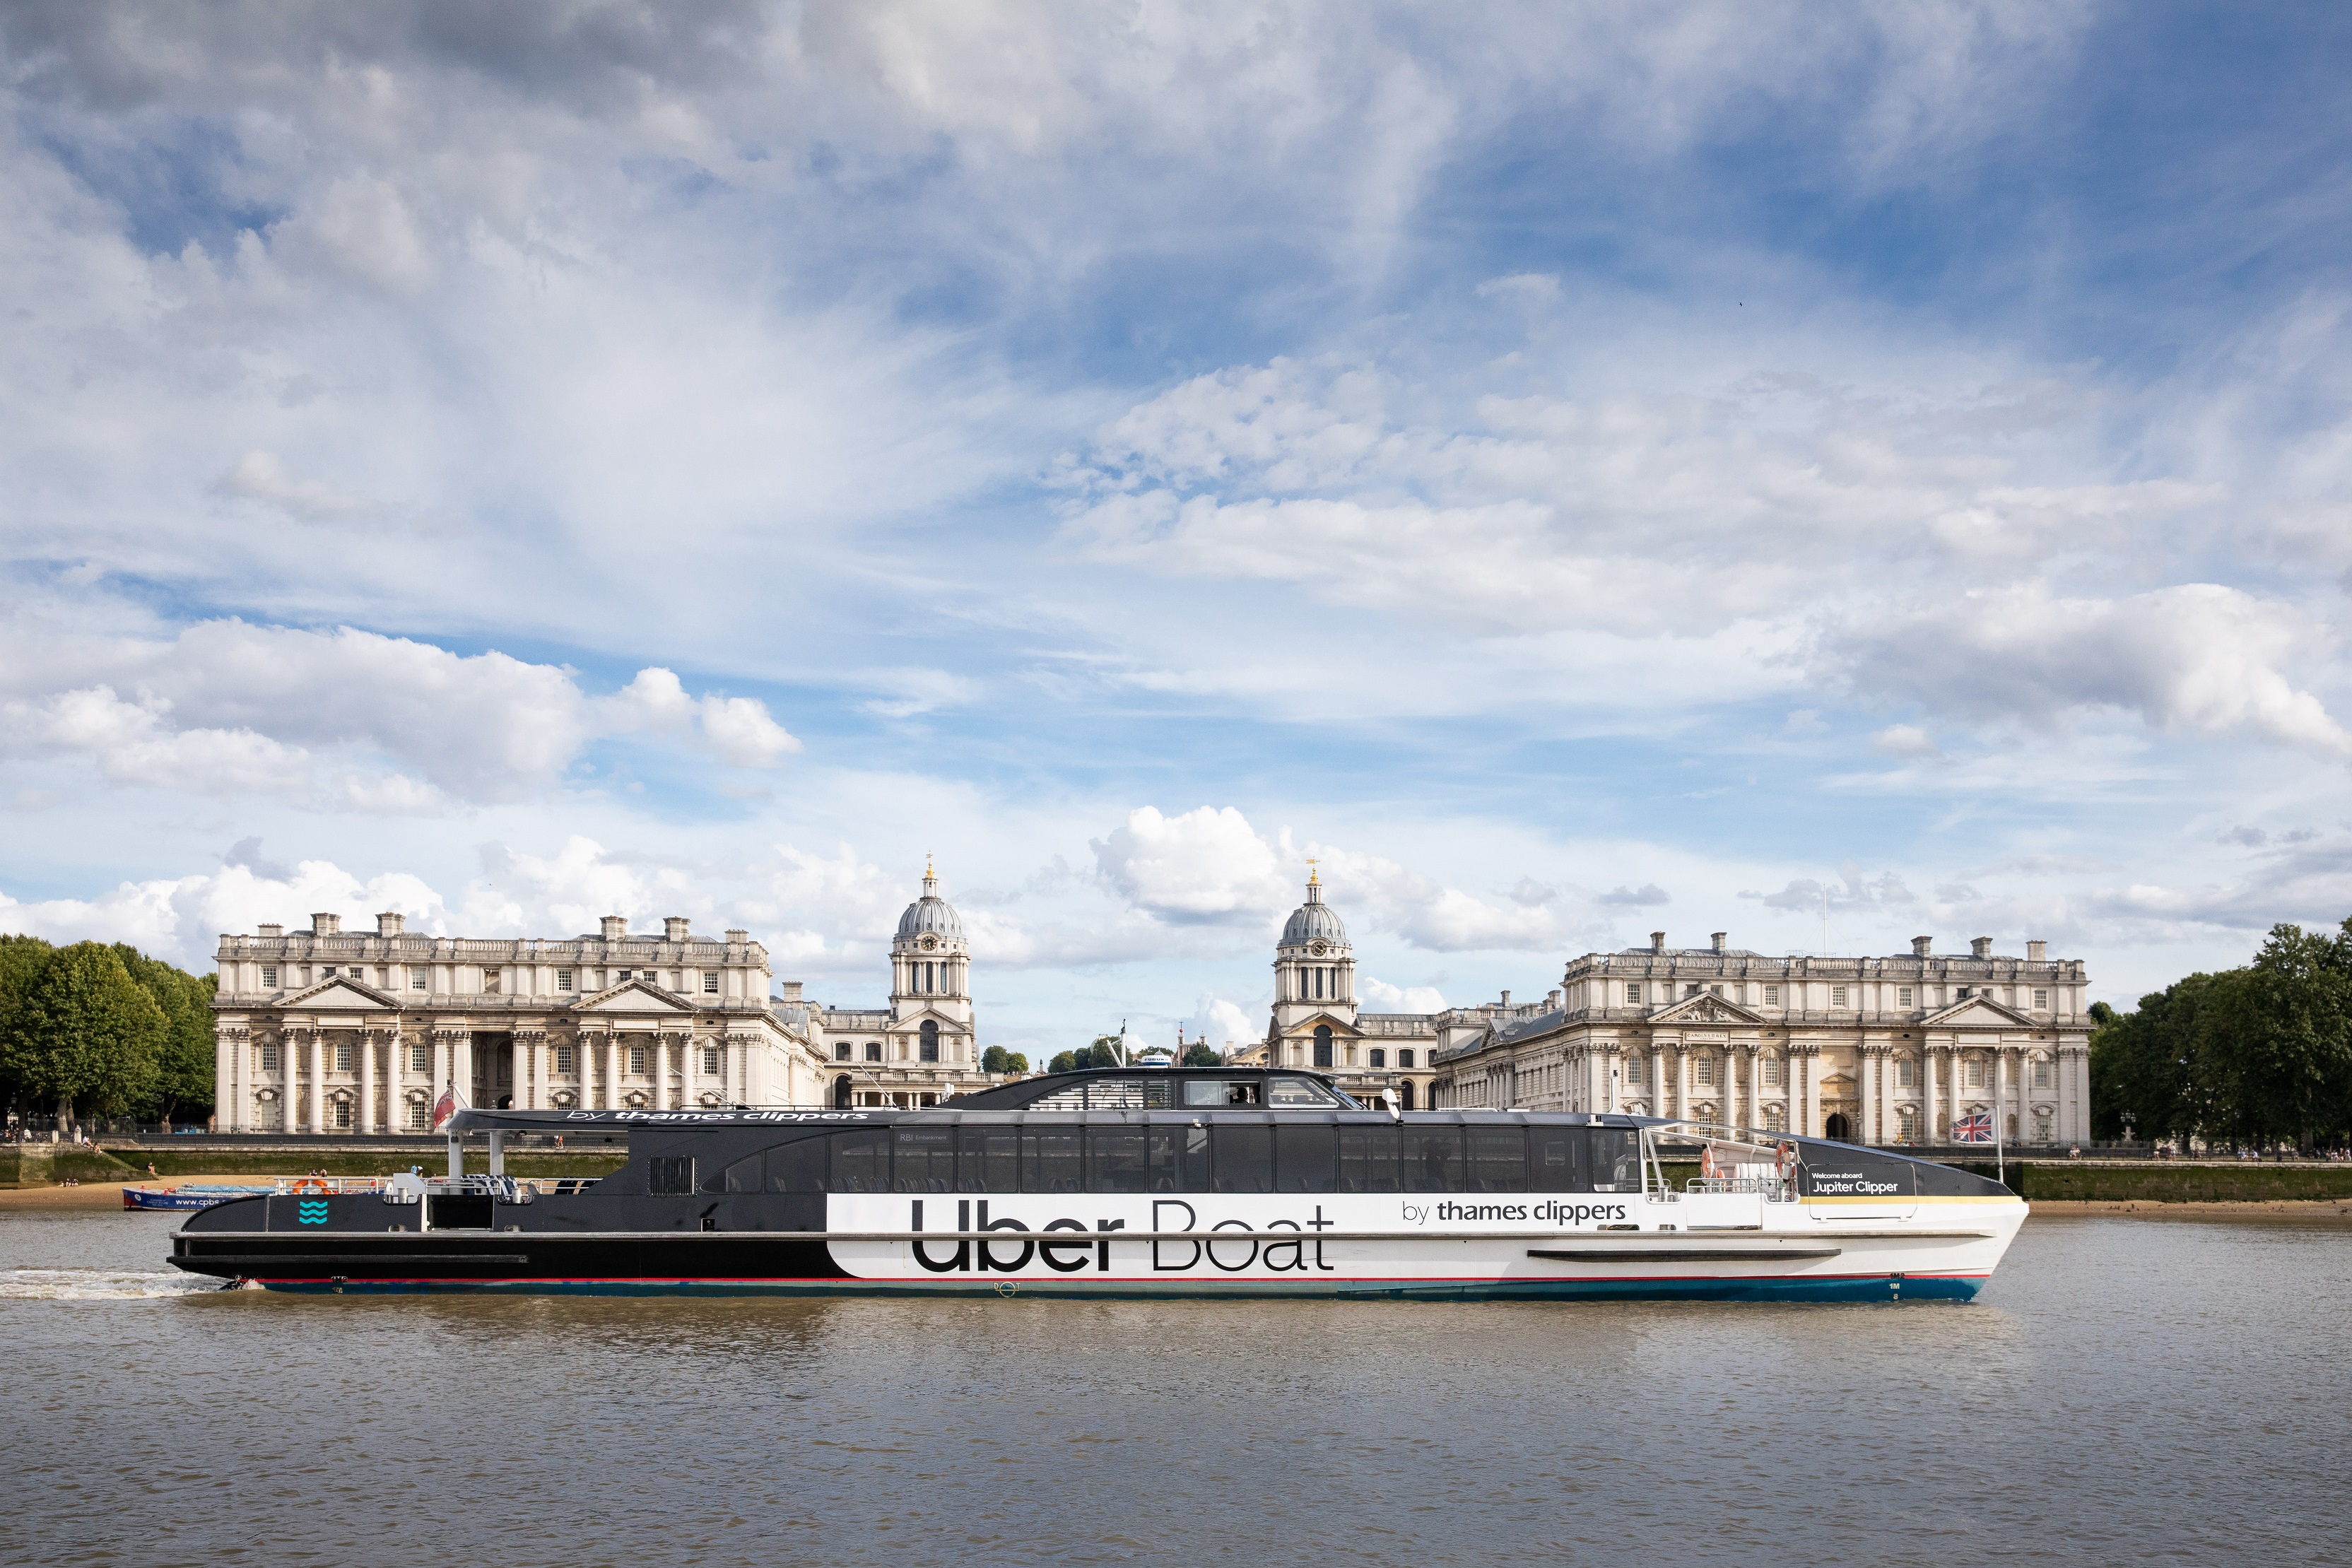 Uber_Boat_by_Thames_Clippers_Greenwich.